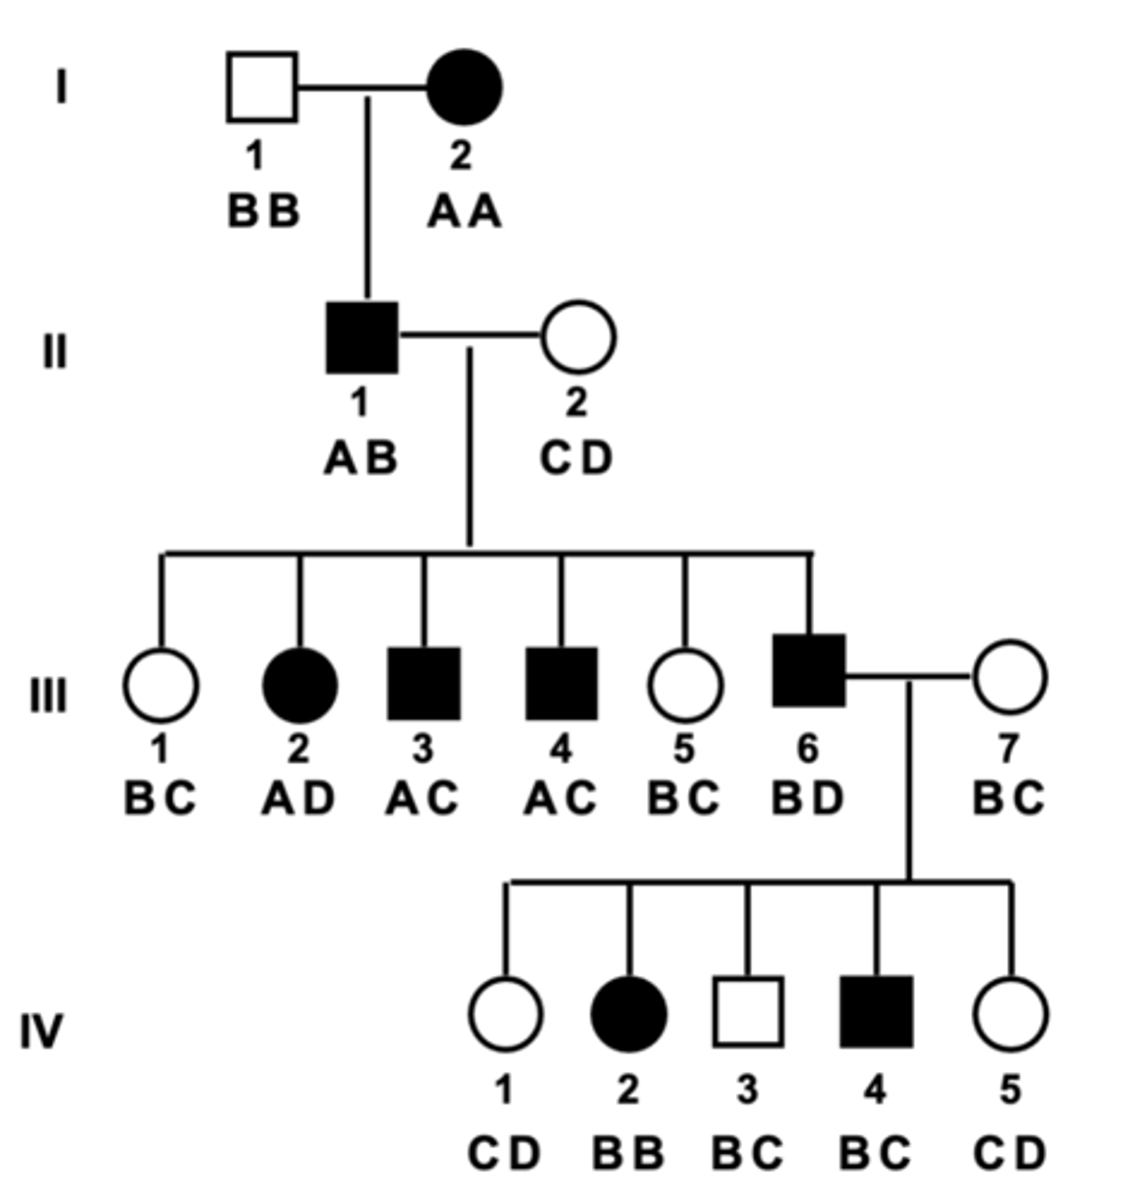 <p>Below is the pedigree for a family that carries an autosomal dominant disorder that has complete penetrance and invariable expressivity. The mutation causing this disorder is LINKED to a DNA marker locus with four alleles A, B, C, and D. The marker alleles present within each individual are indicate below the pedigree symbols. Which individual in generation IV is likely to be recombinant?</p>